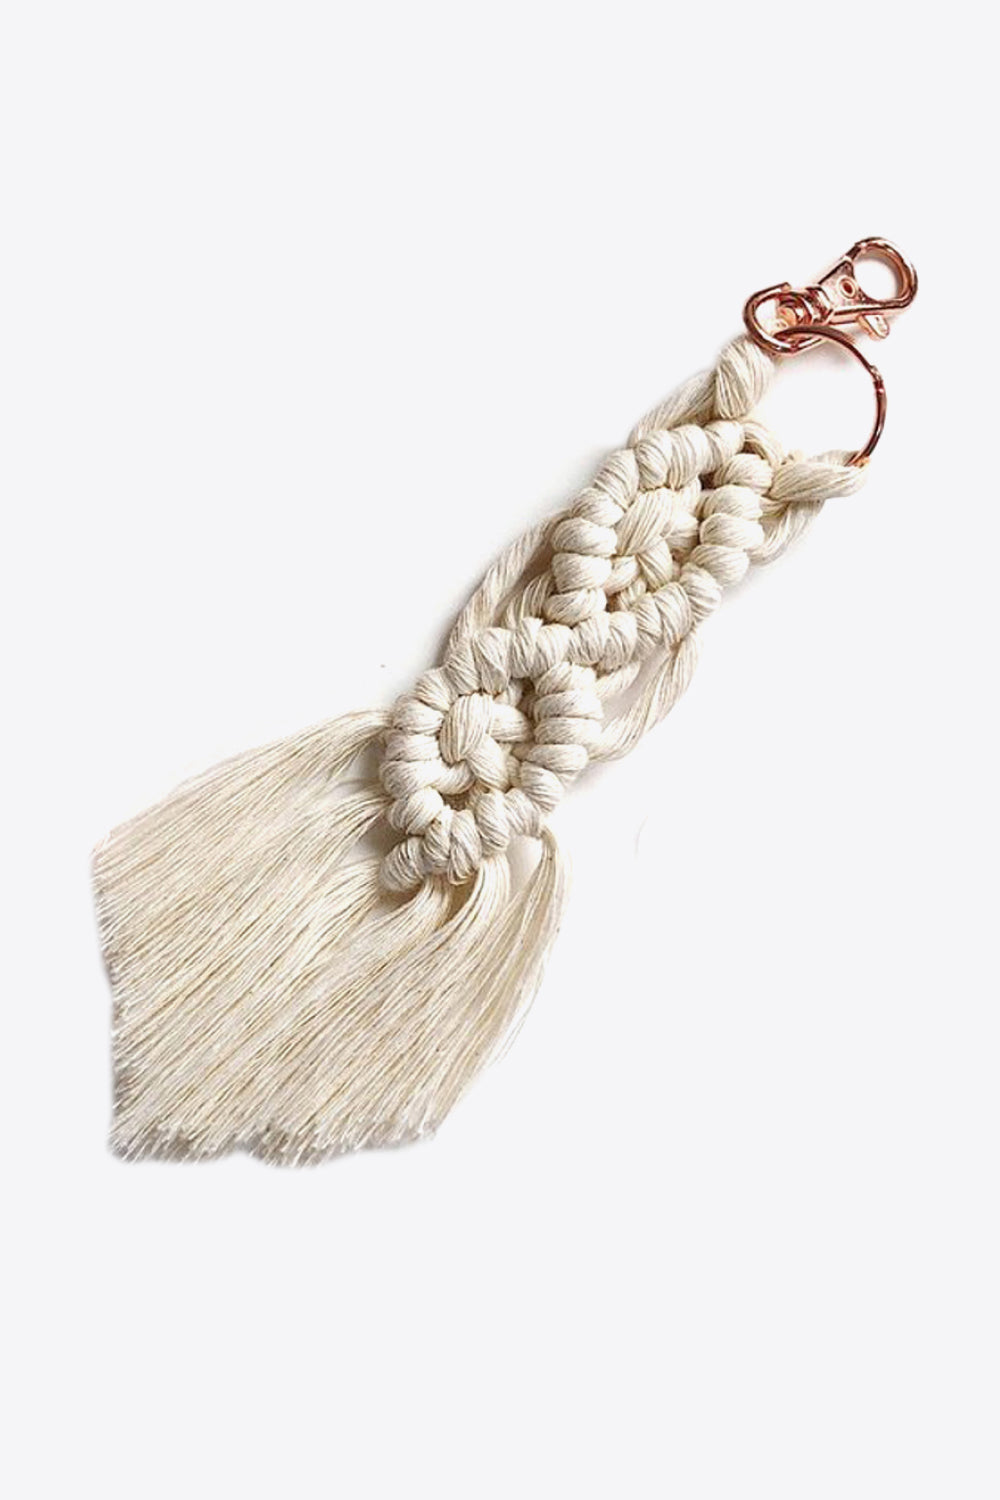 Trendsi Cupid Beauty Supplies Cream / One Size Keychains Assorted 4-Pack Macrame Fringe Keychain